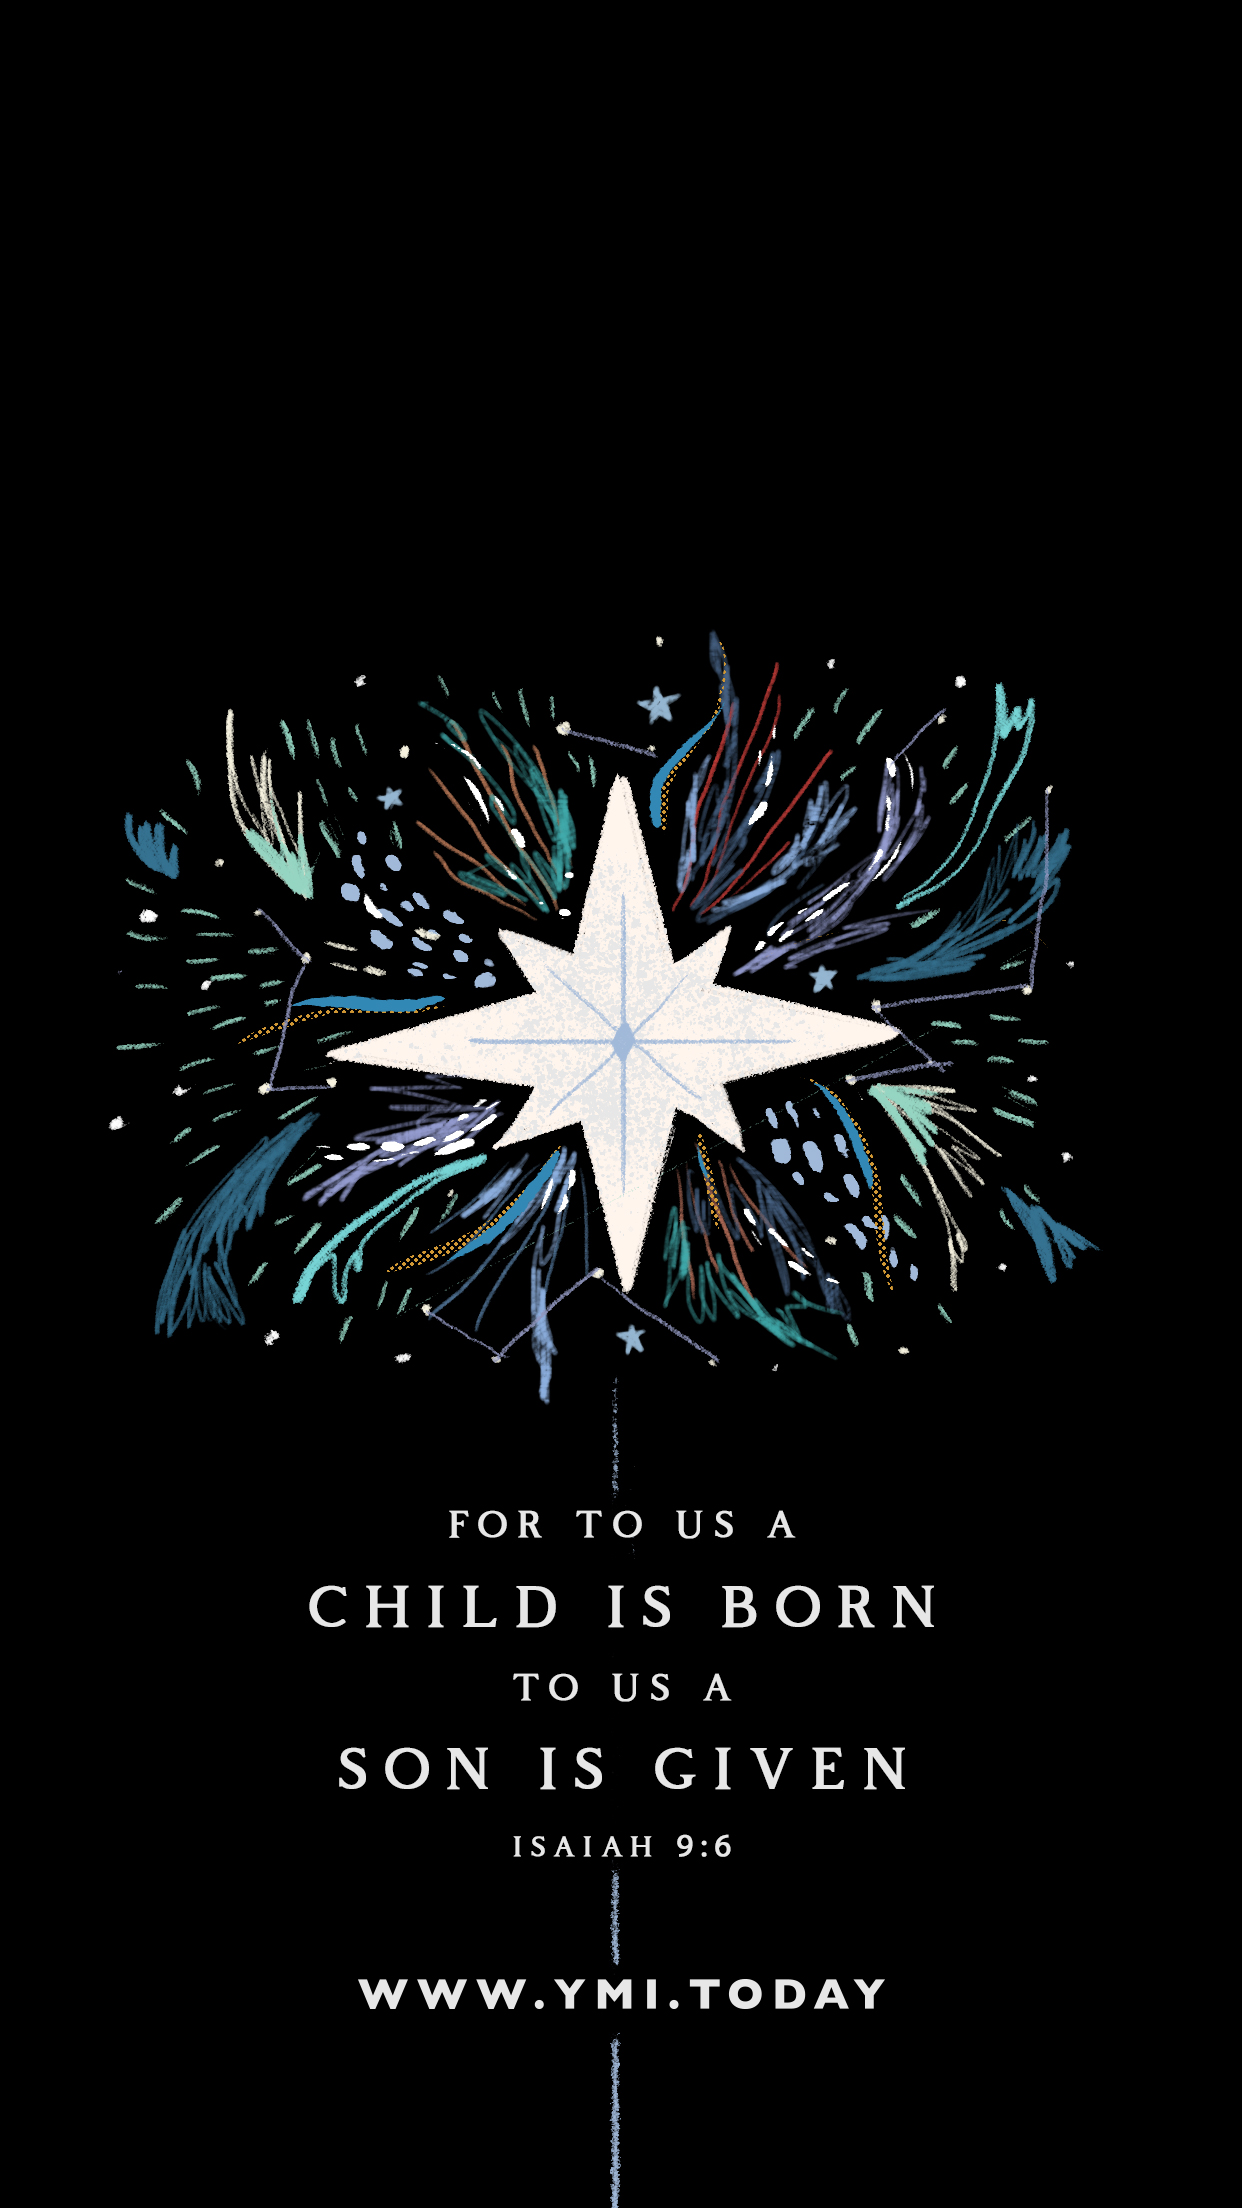 YMI December 2019 Phone Lockscreen - For to us a Child is born, to us a Son is given. - Isaiah 9:6